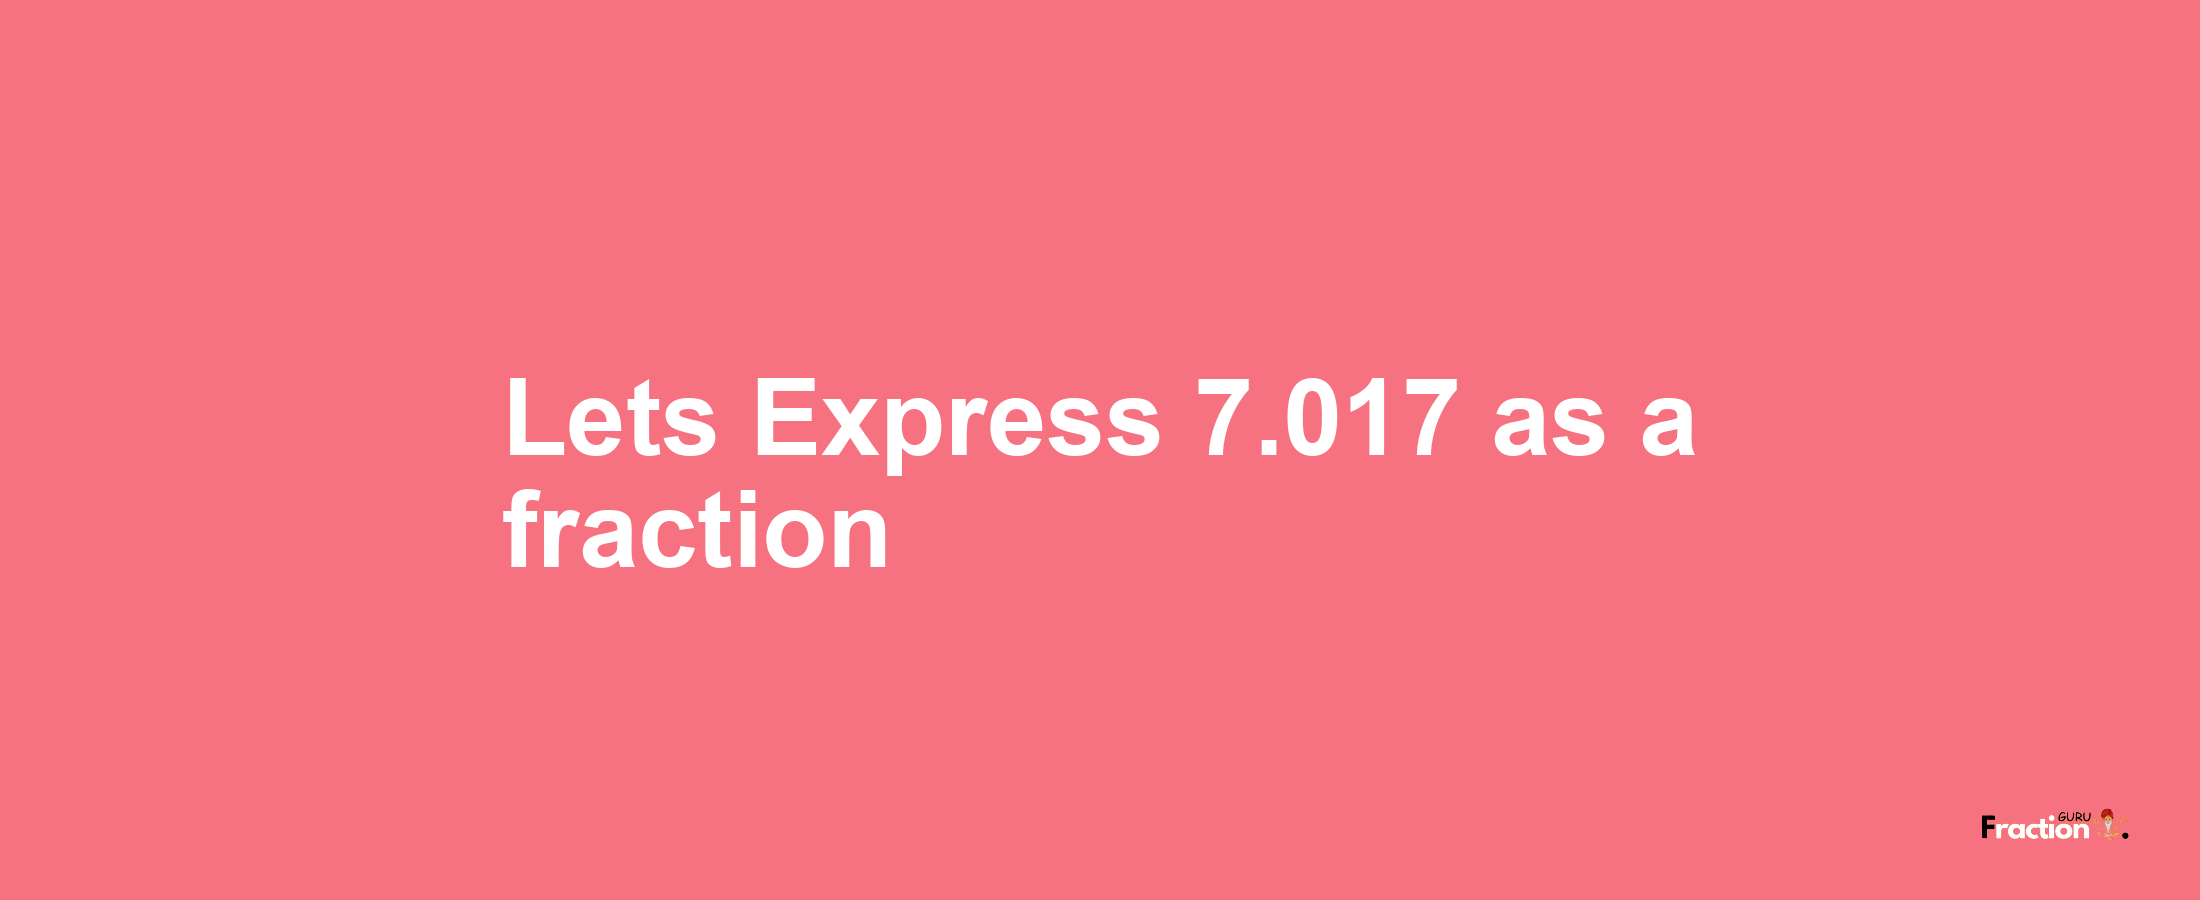 Lets Express 7.017 as afraction